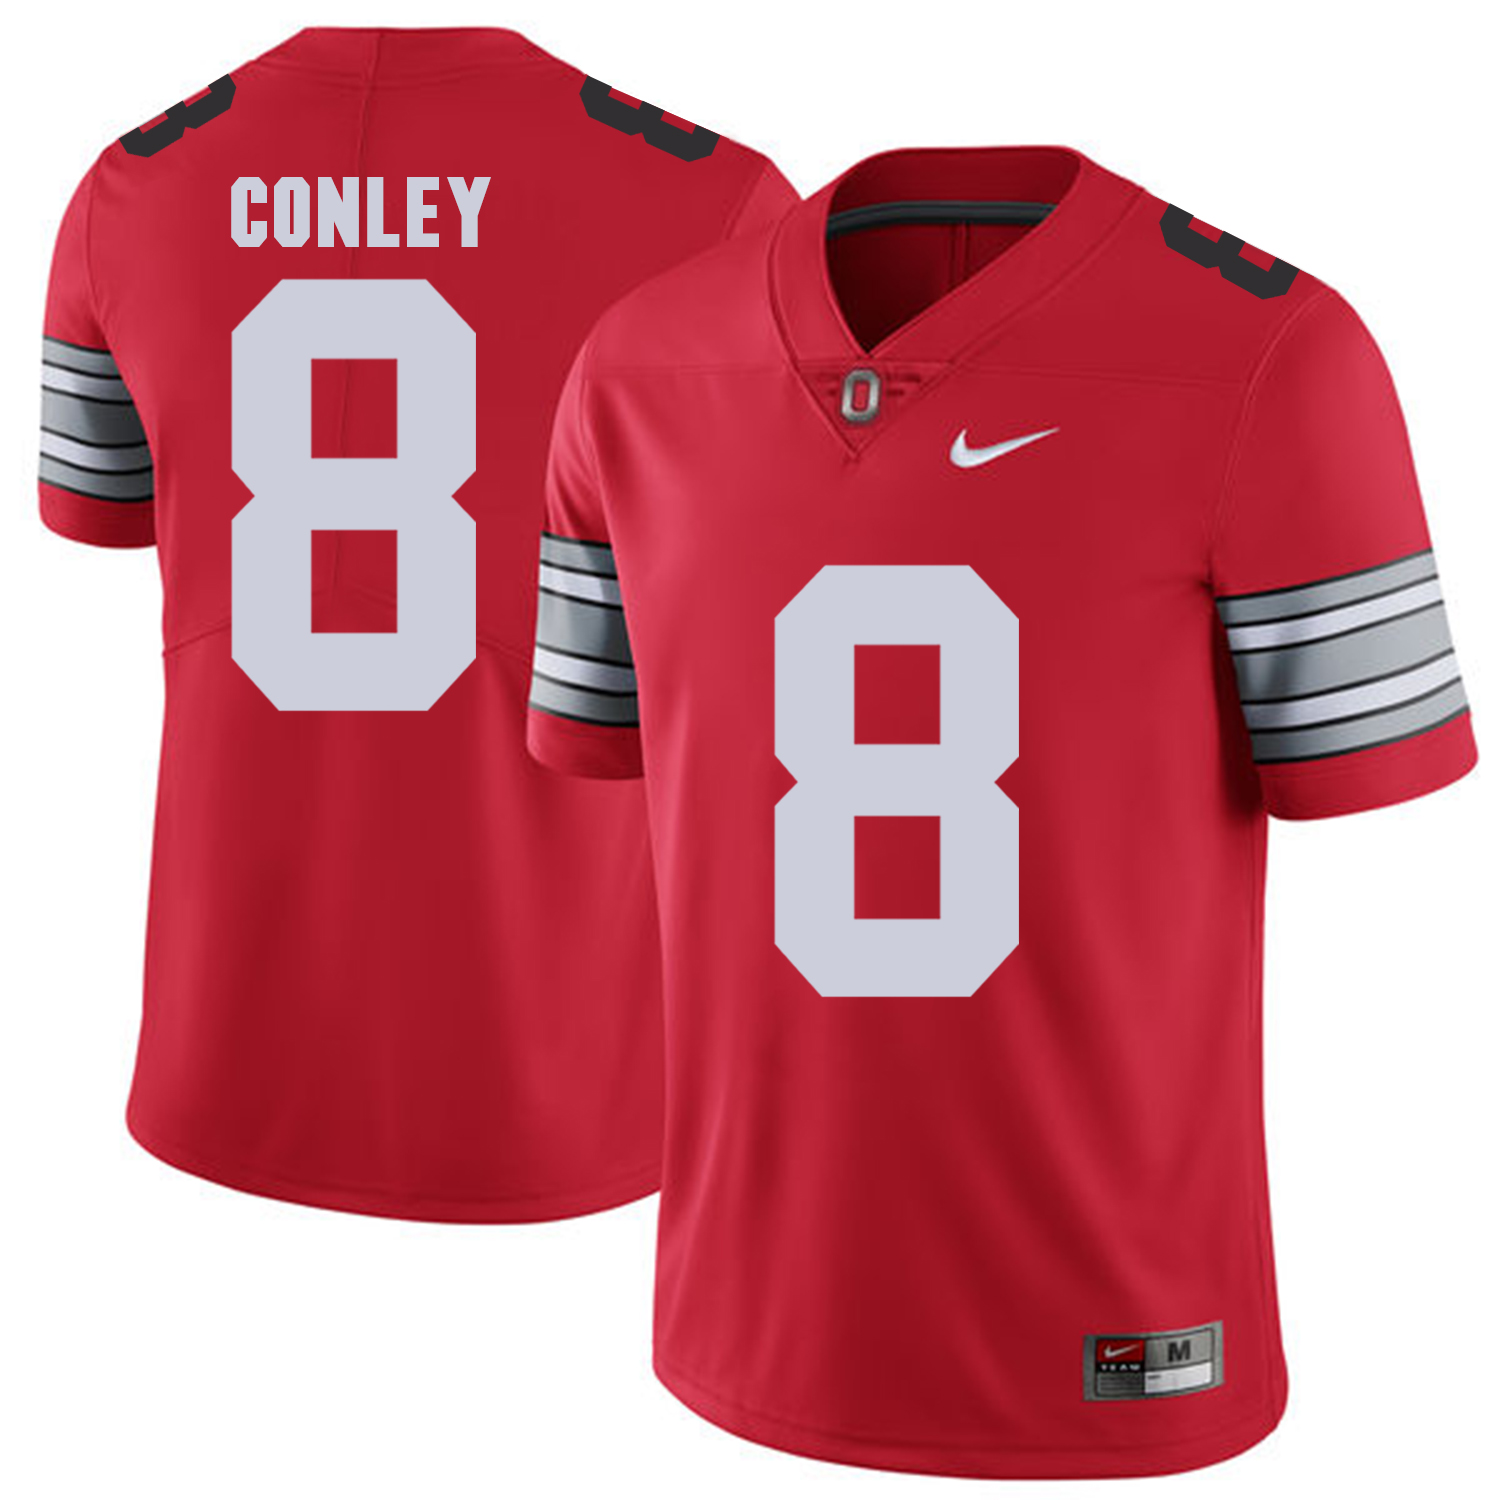 Ohio State Buckeyes 8 Gareon Conley Red 2018 Spring Game College Football Limited Jersey